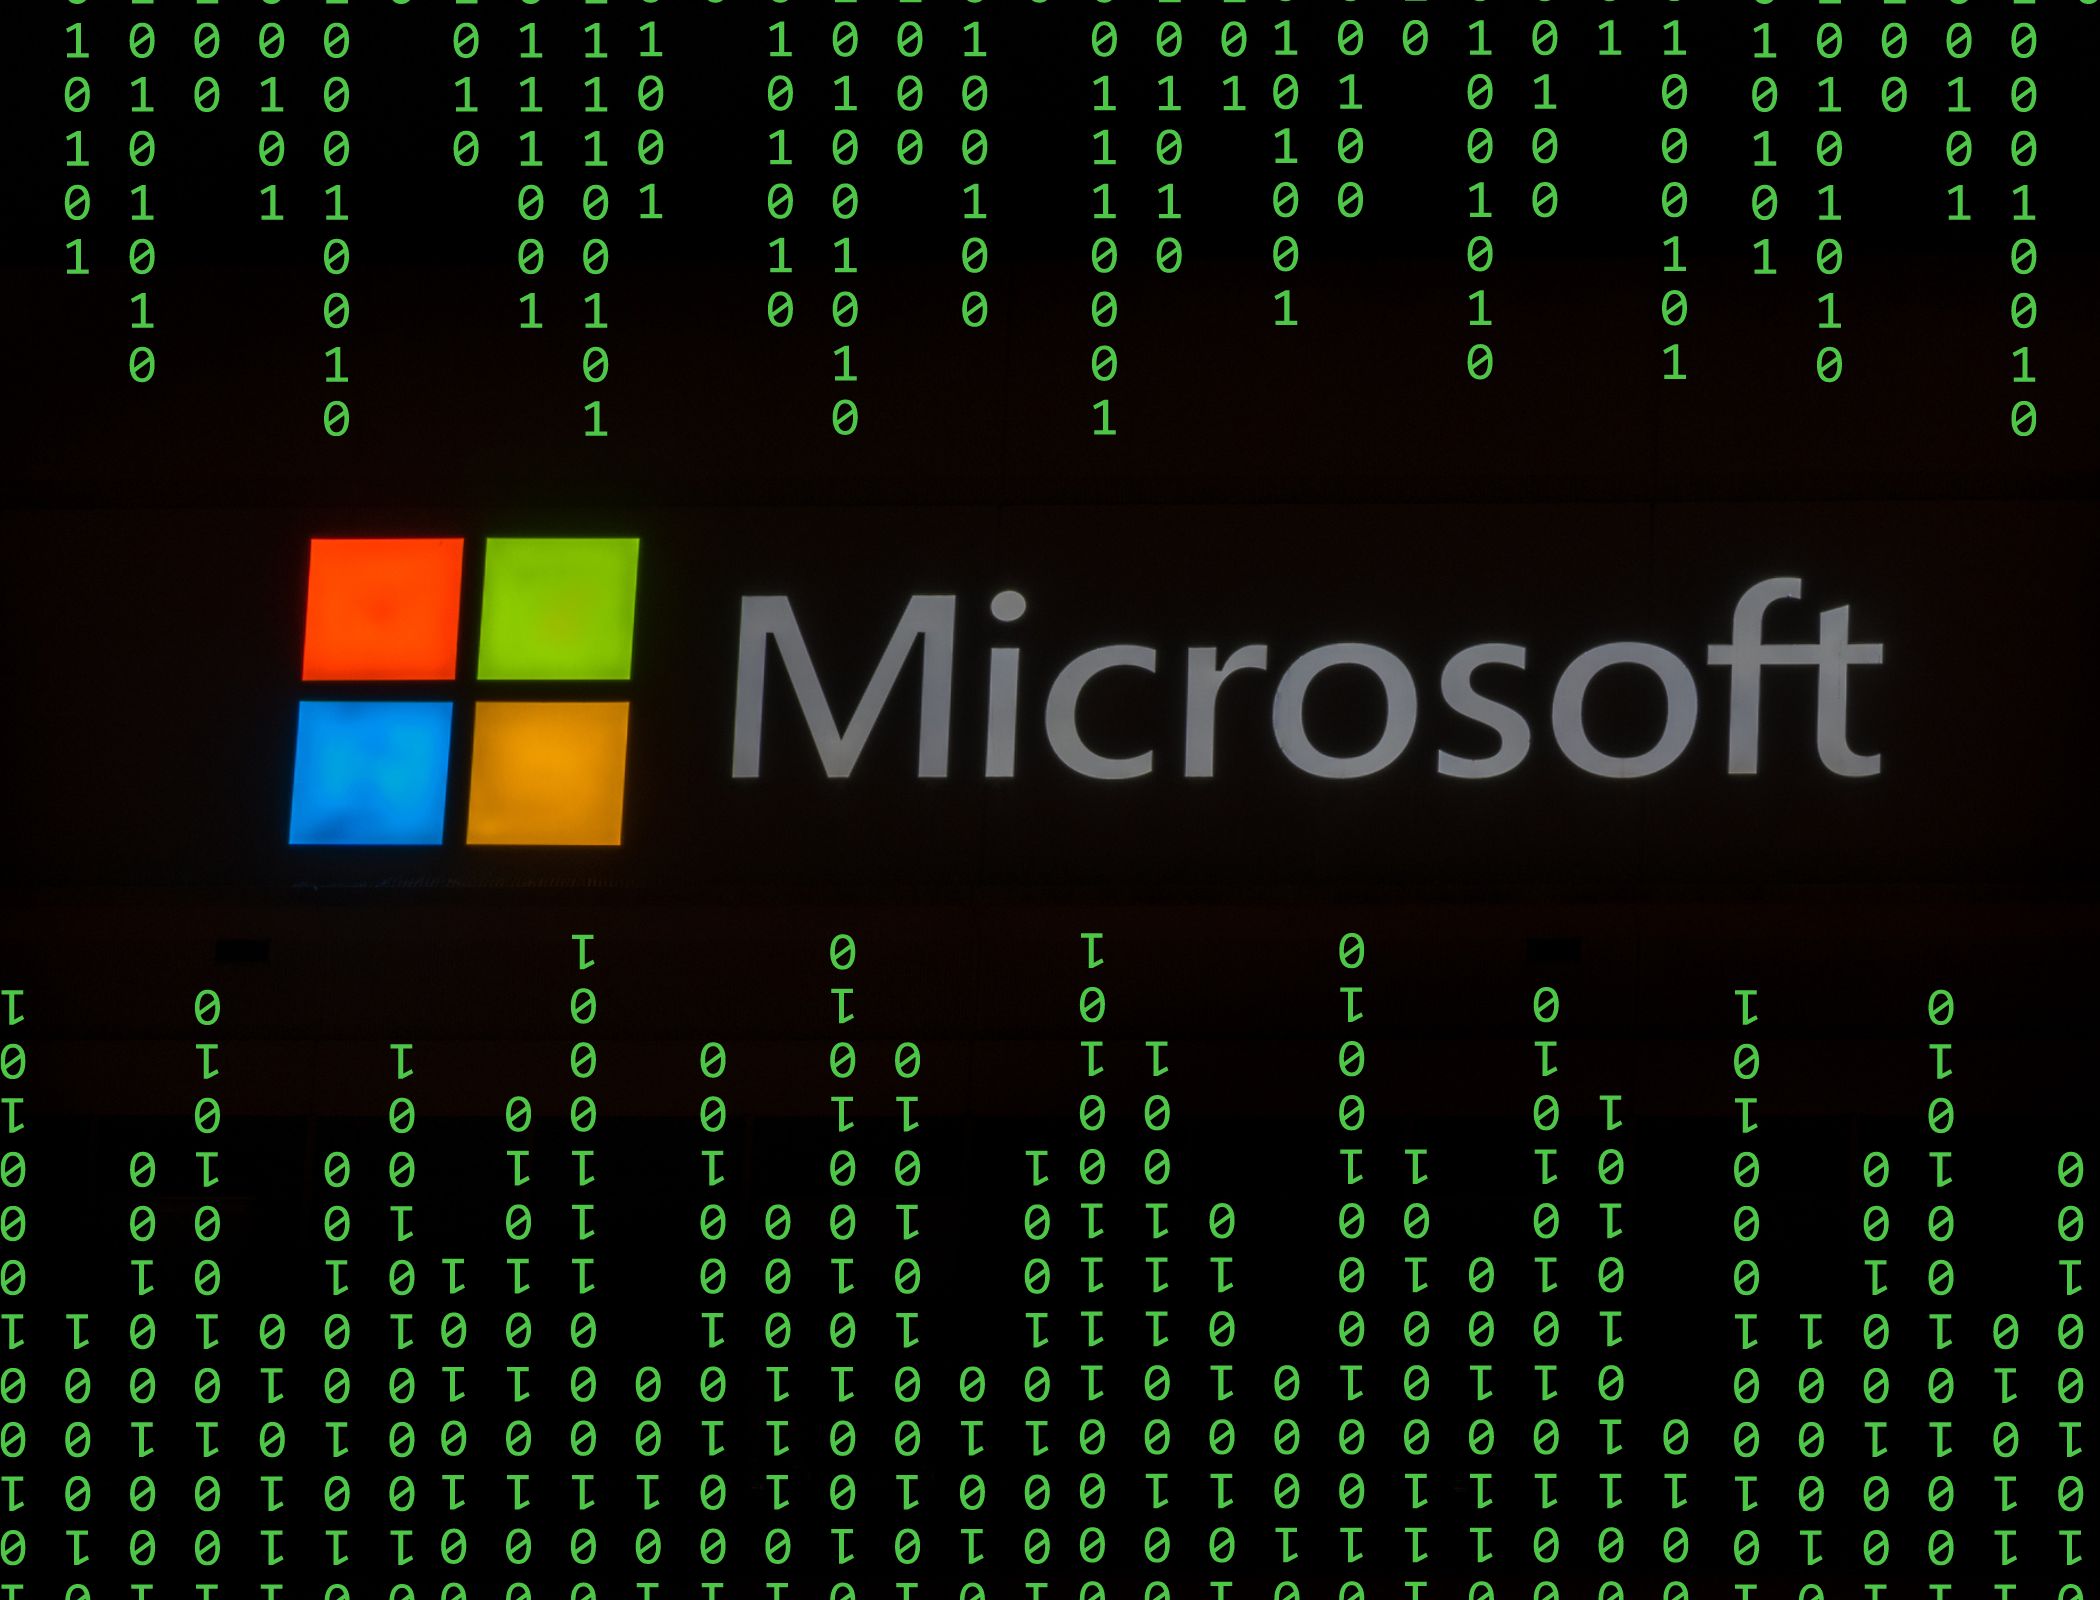 Government email accounts breached in Microsoft hack